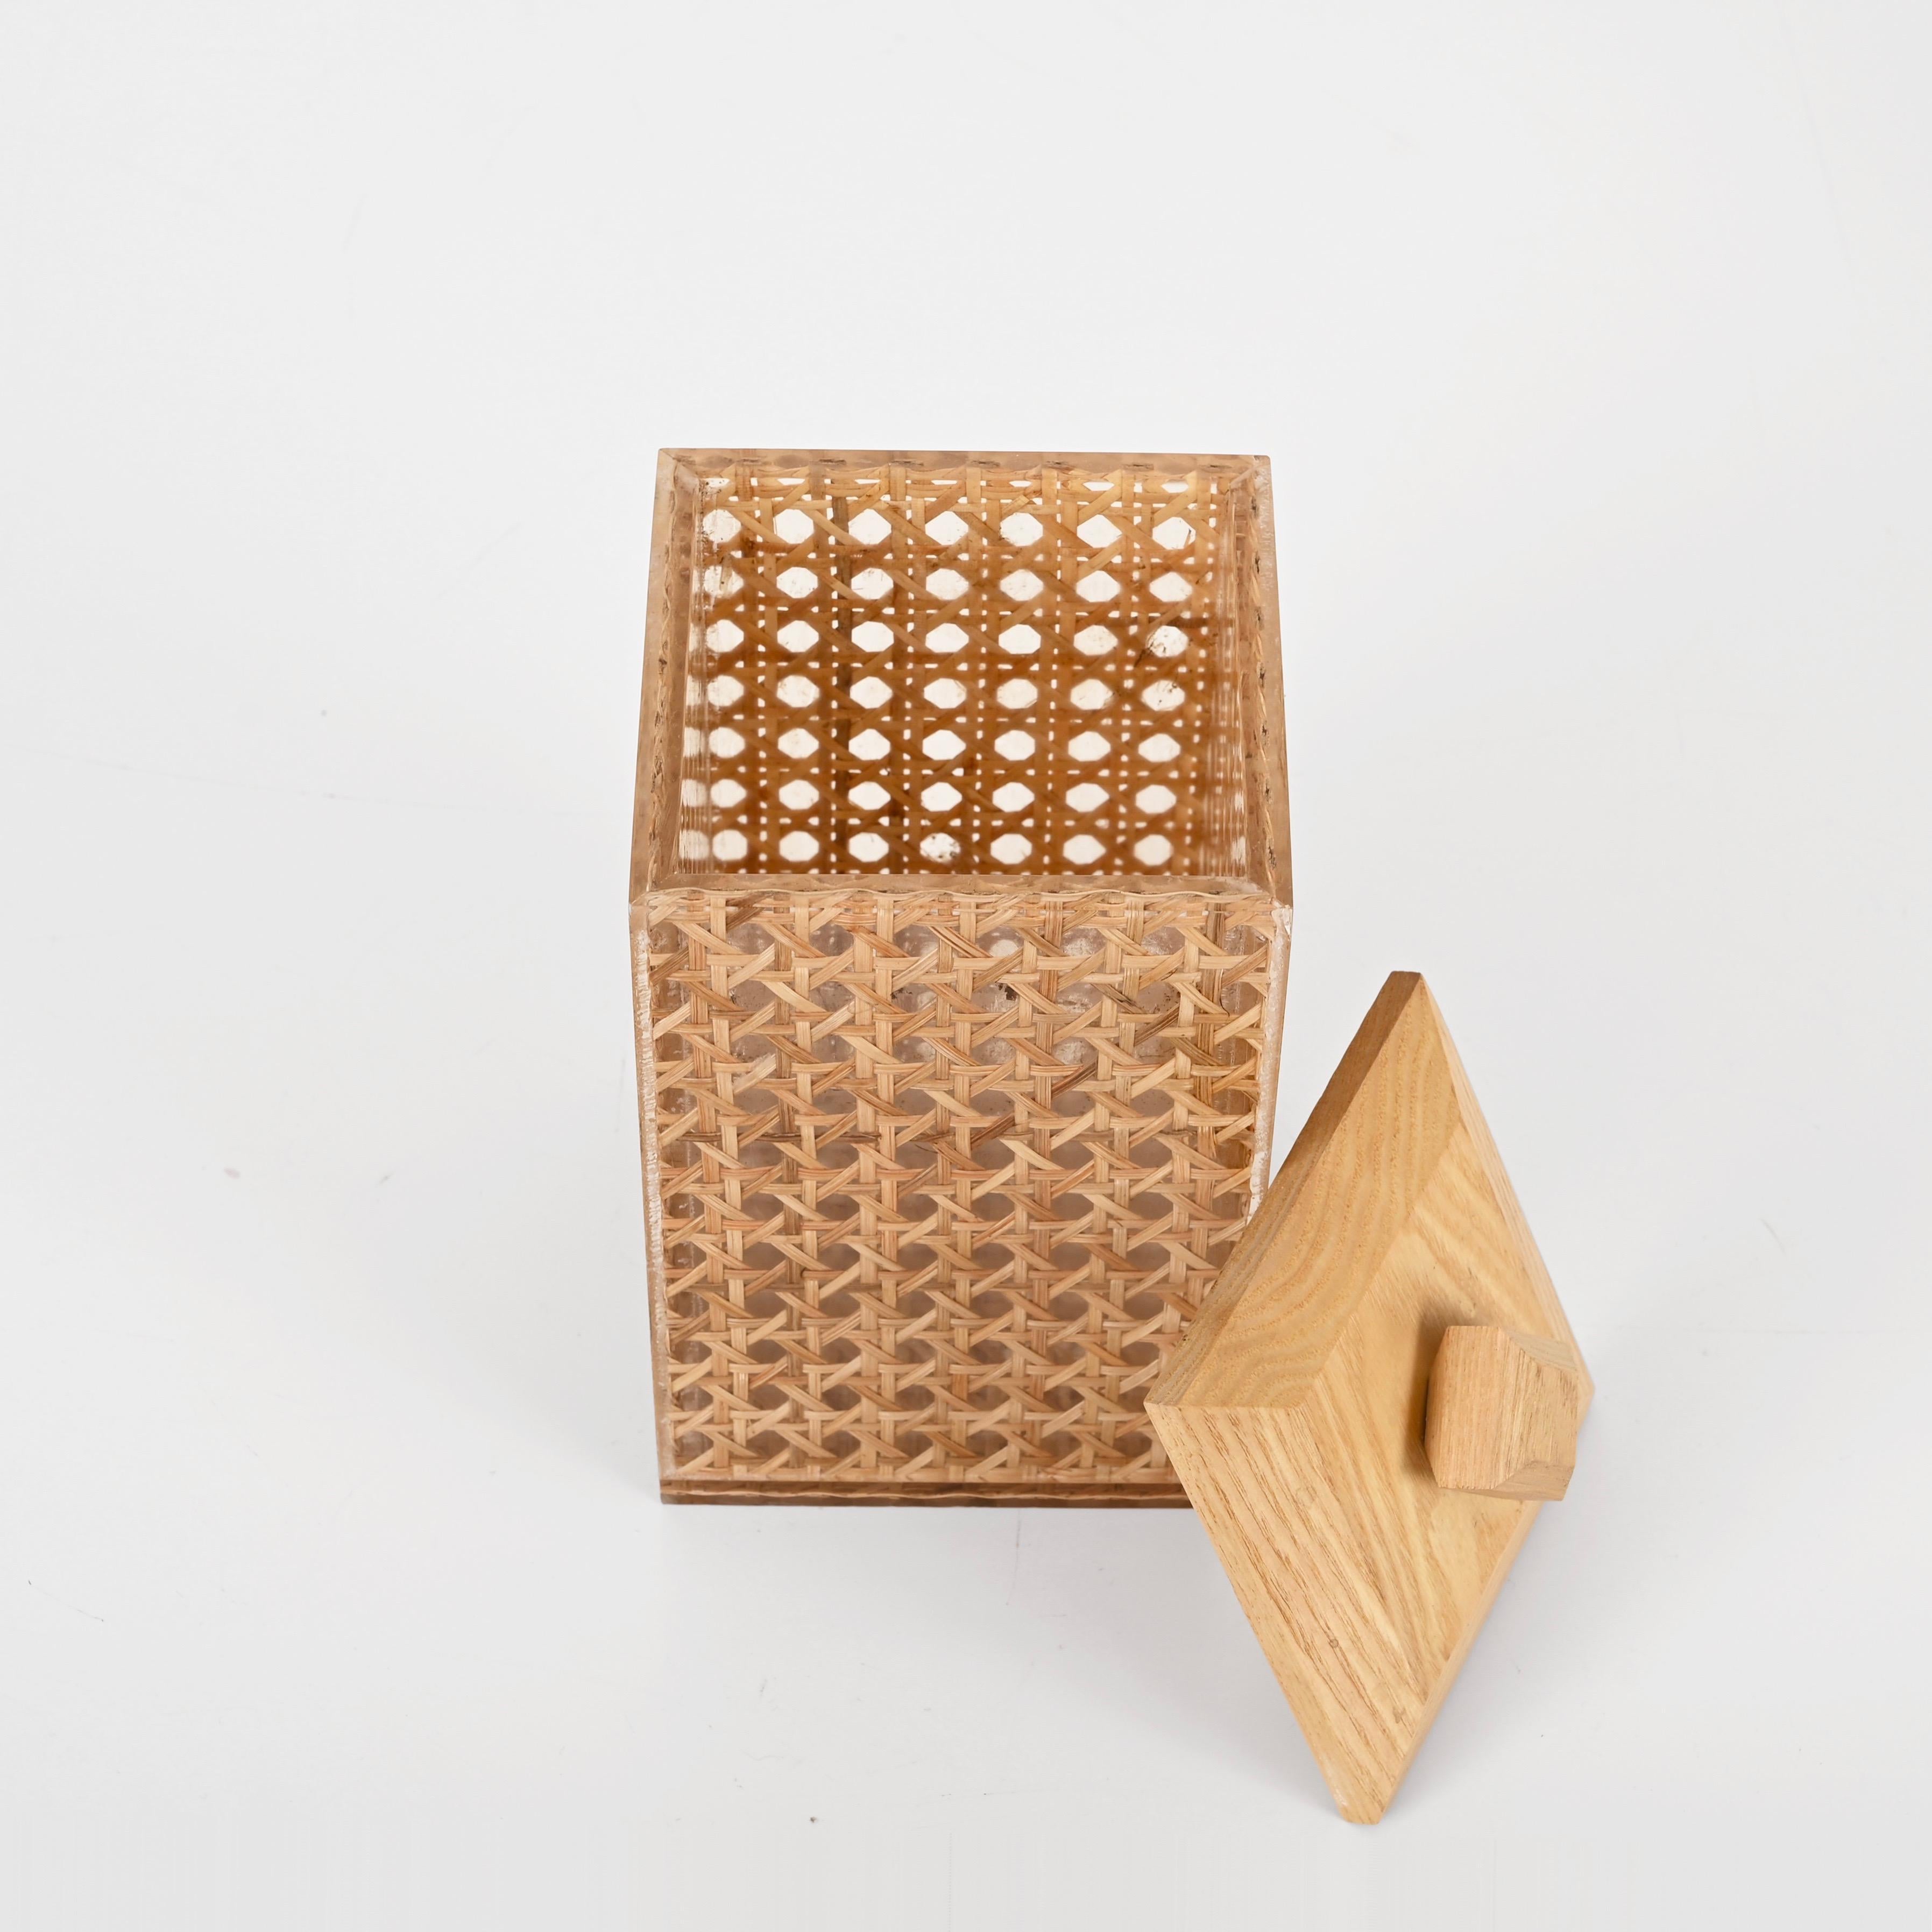 Italian Wicker, Lucite an Wood Decorative Box, Christian Dior Style, Italy 1970s  For Sale